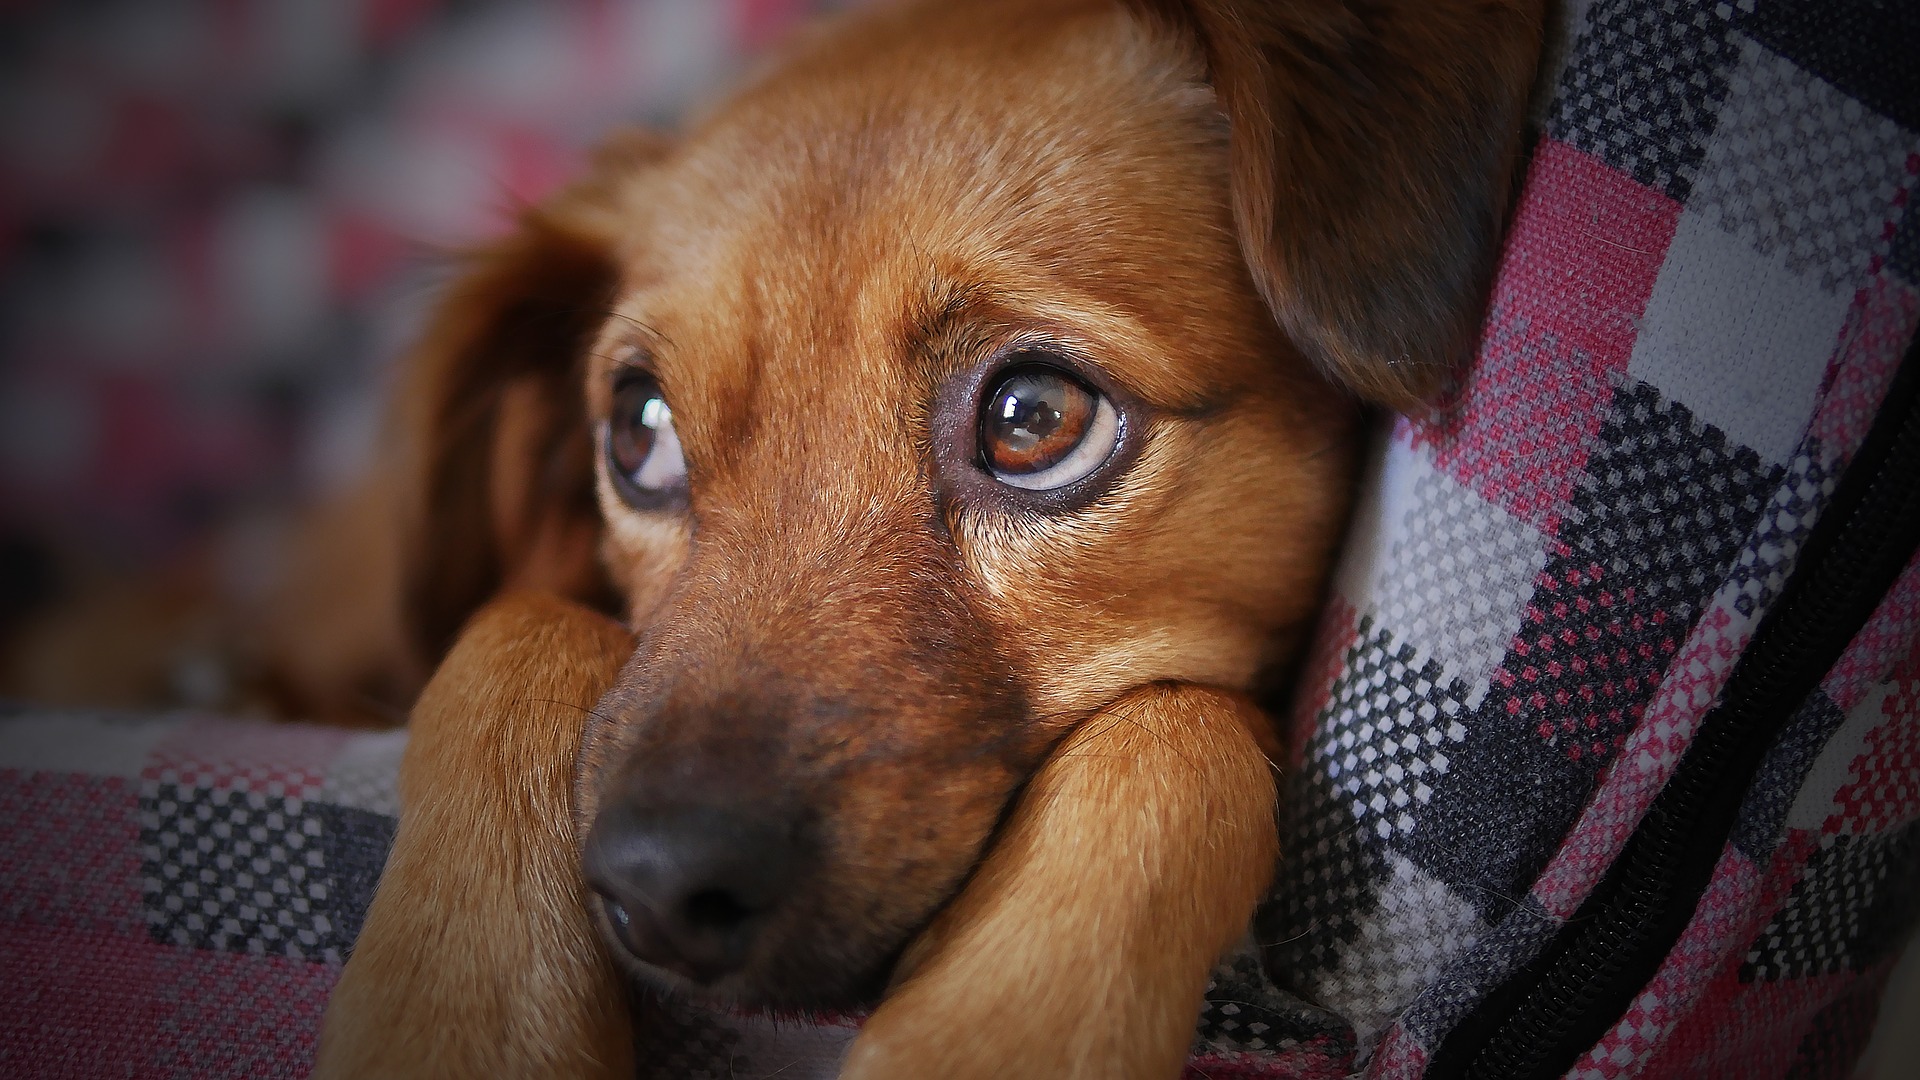 Science confirms that dogs cry for joy like humans